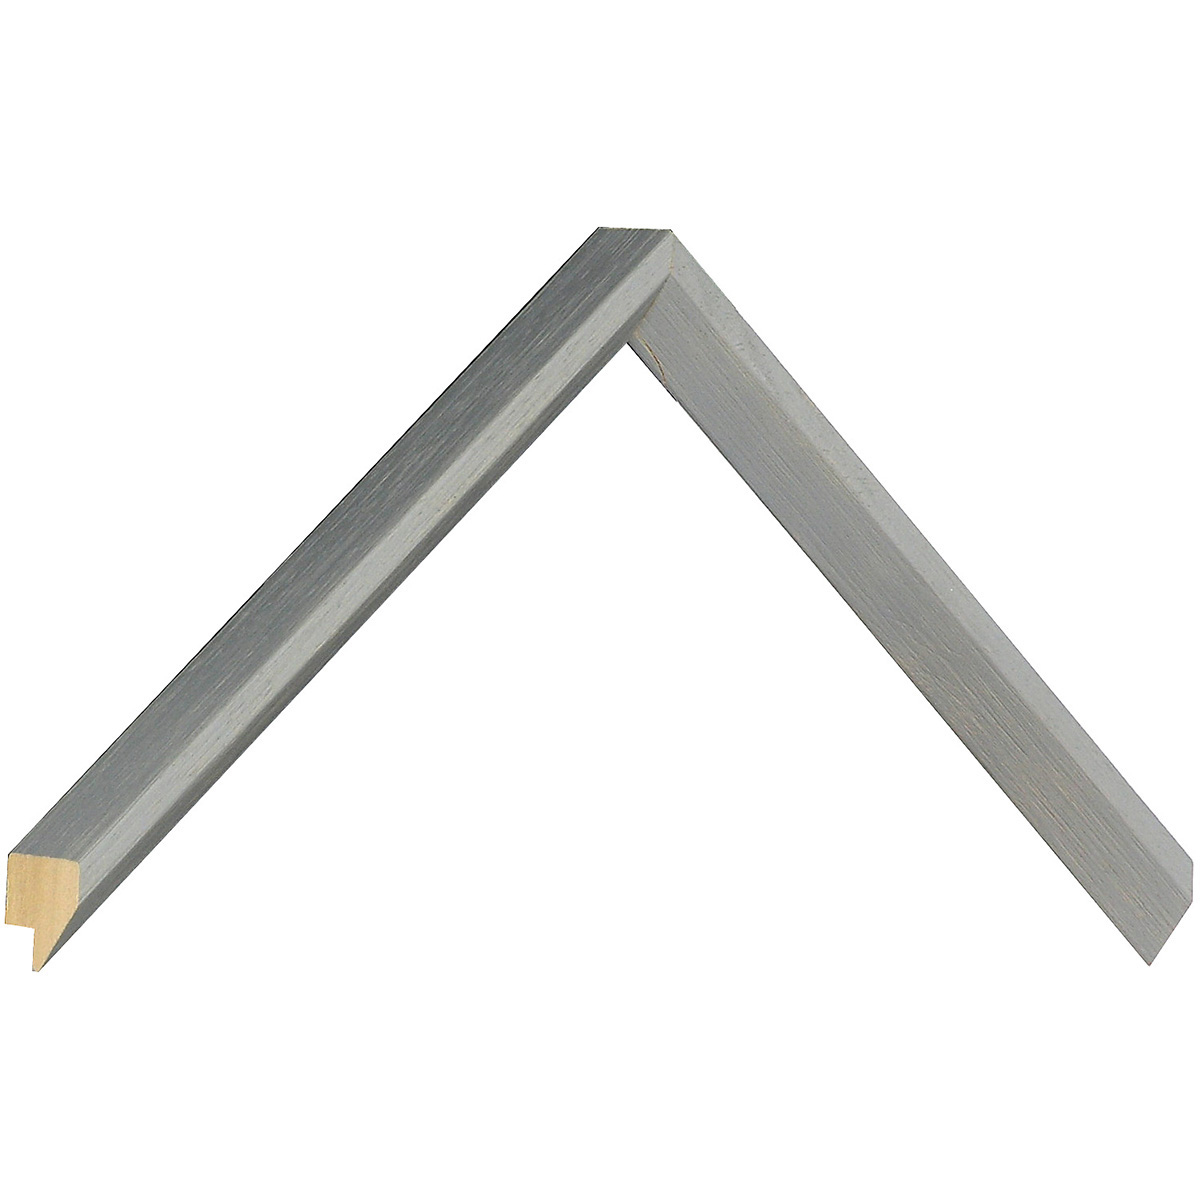 Moulding ayous 25mm height, 14mm width, light grey - Sample